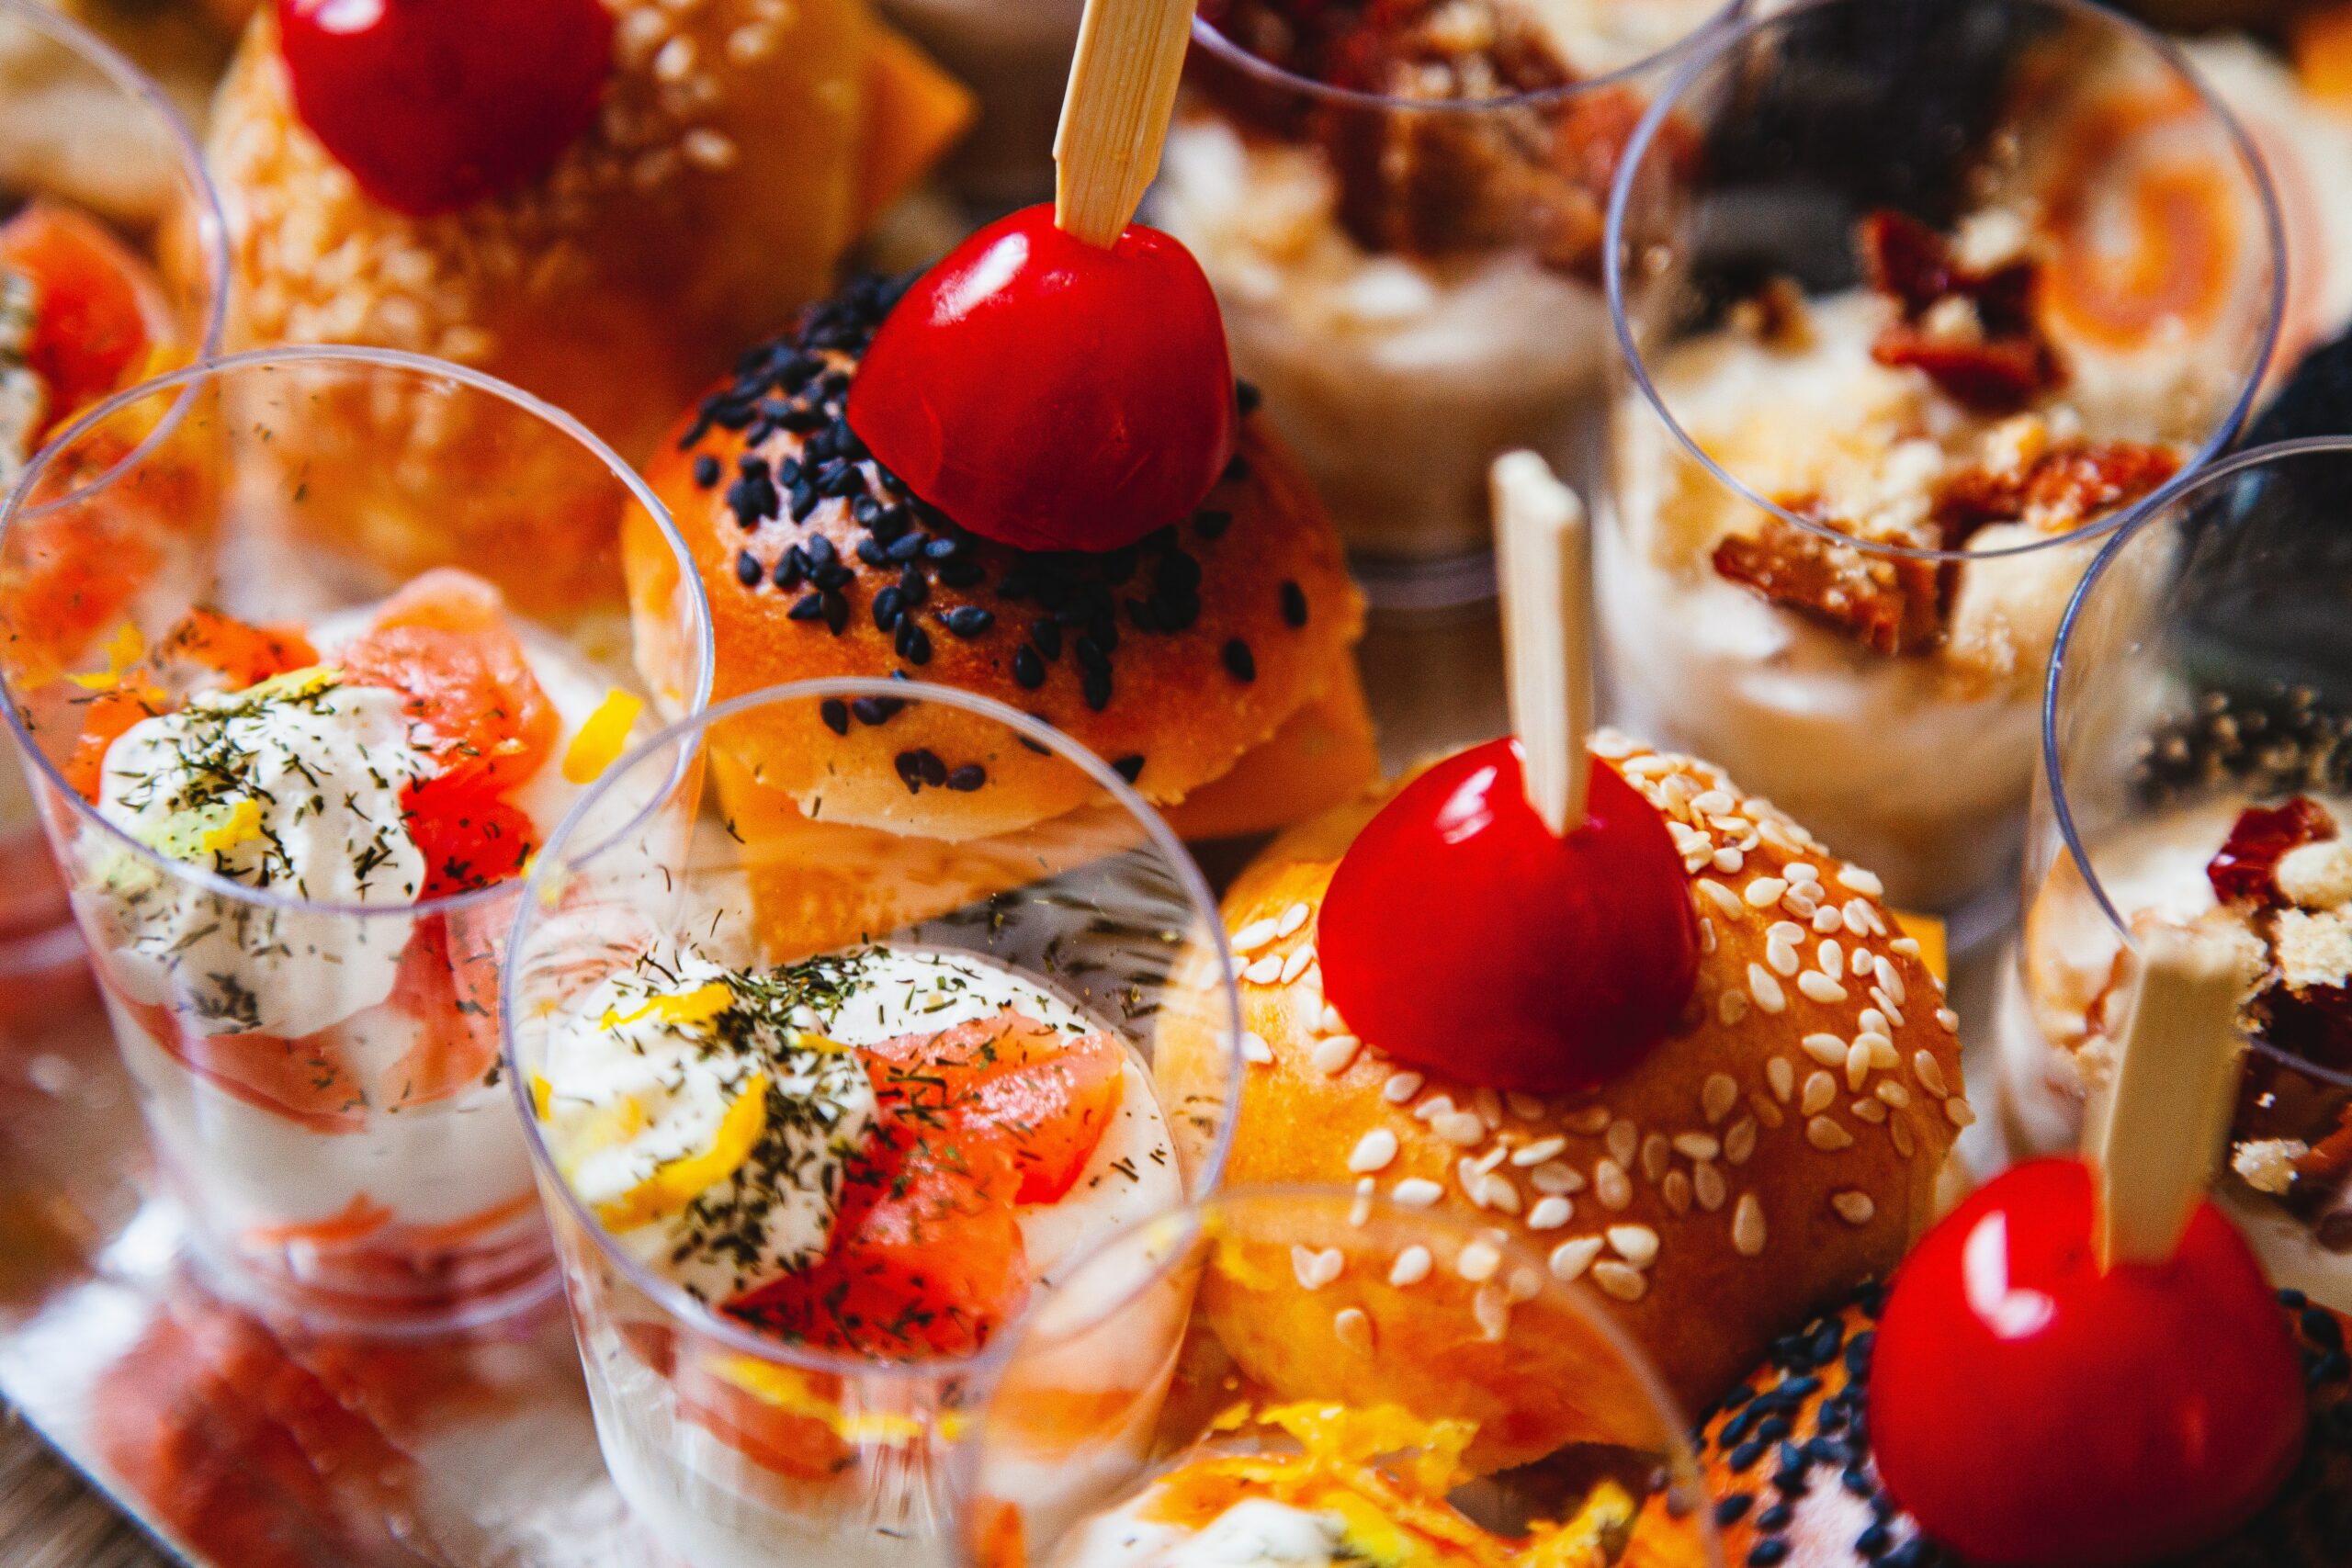 Top down view of several small, cakes, sliders and party favours | Daudruy Infor